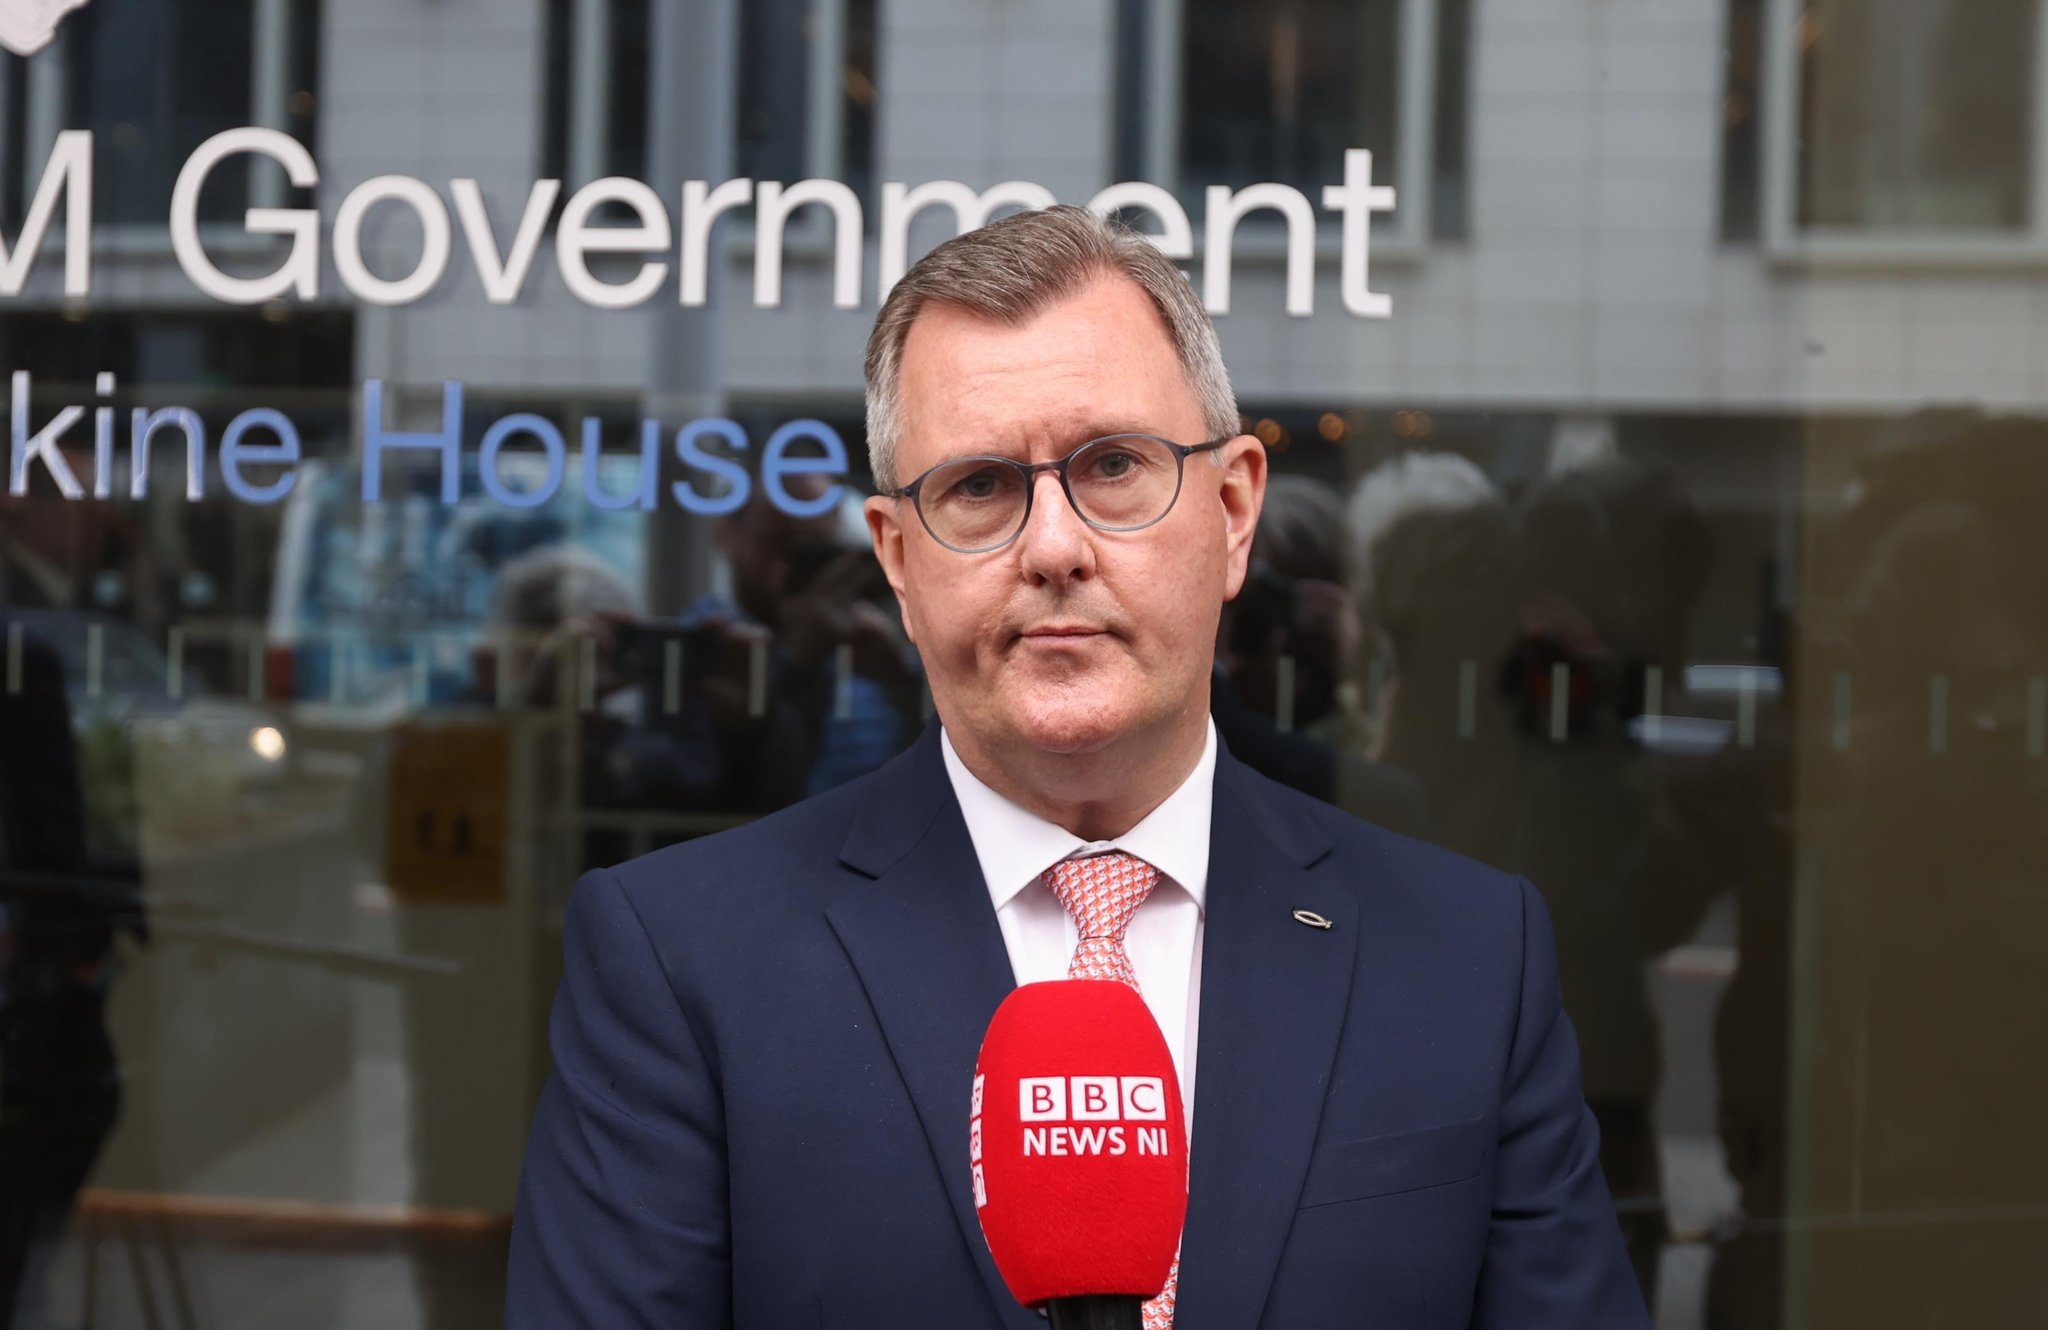 DUP will not join Executive without decisive action on NI Protocol – Donaldson